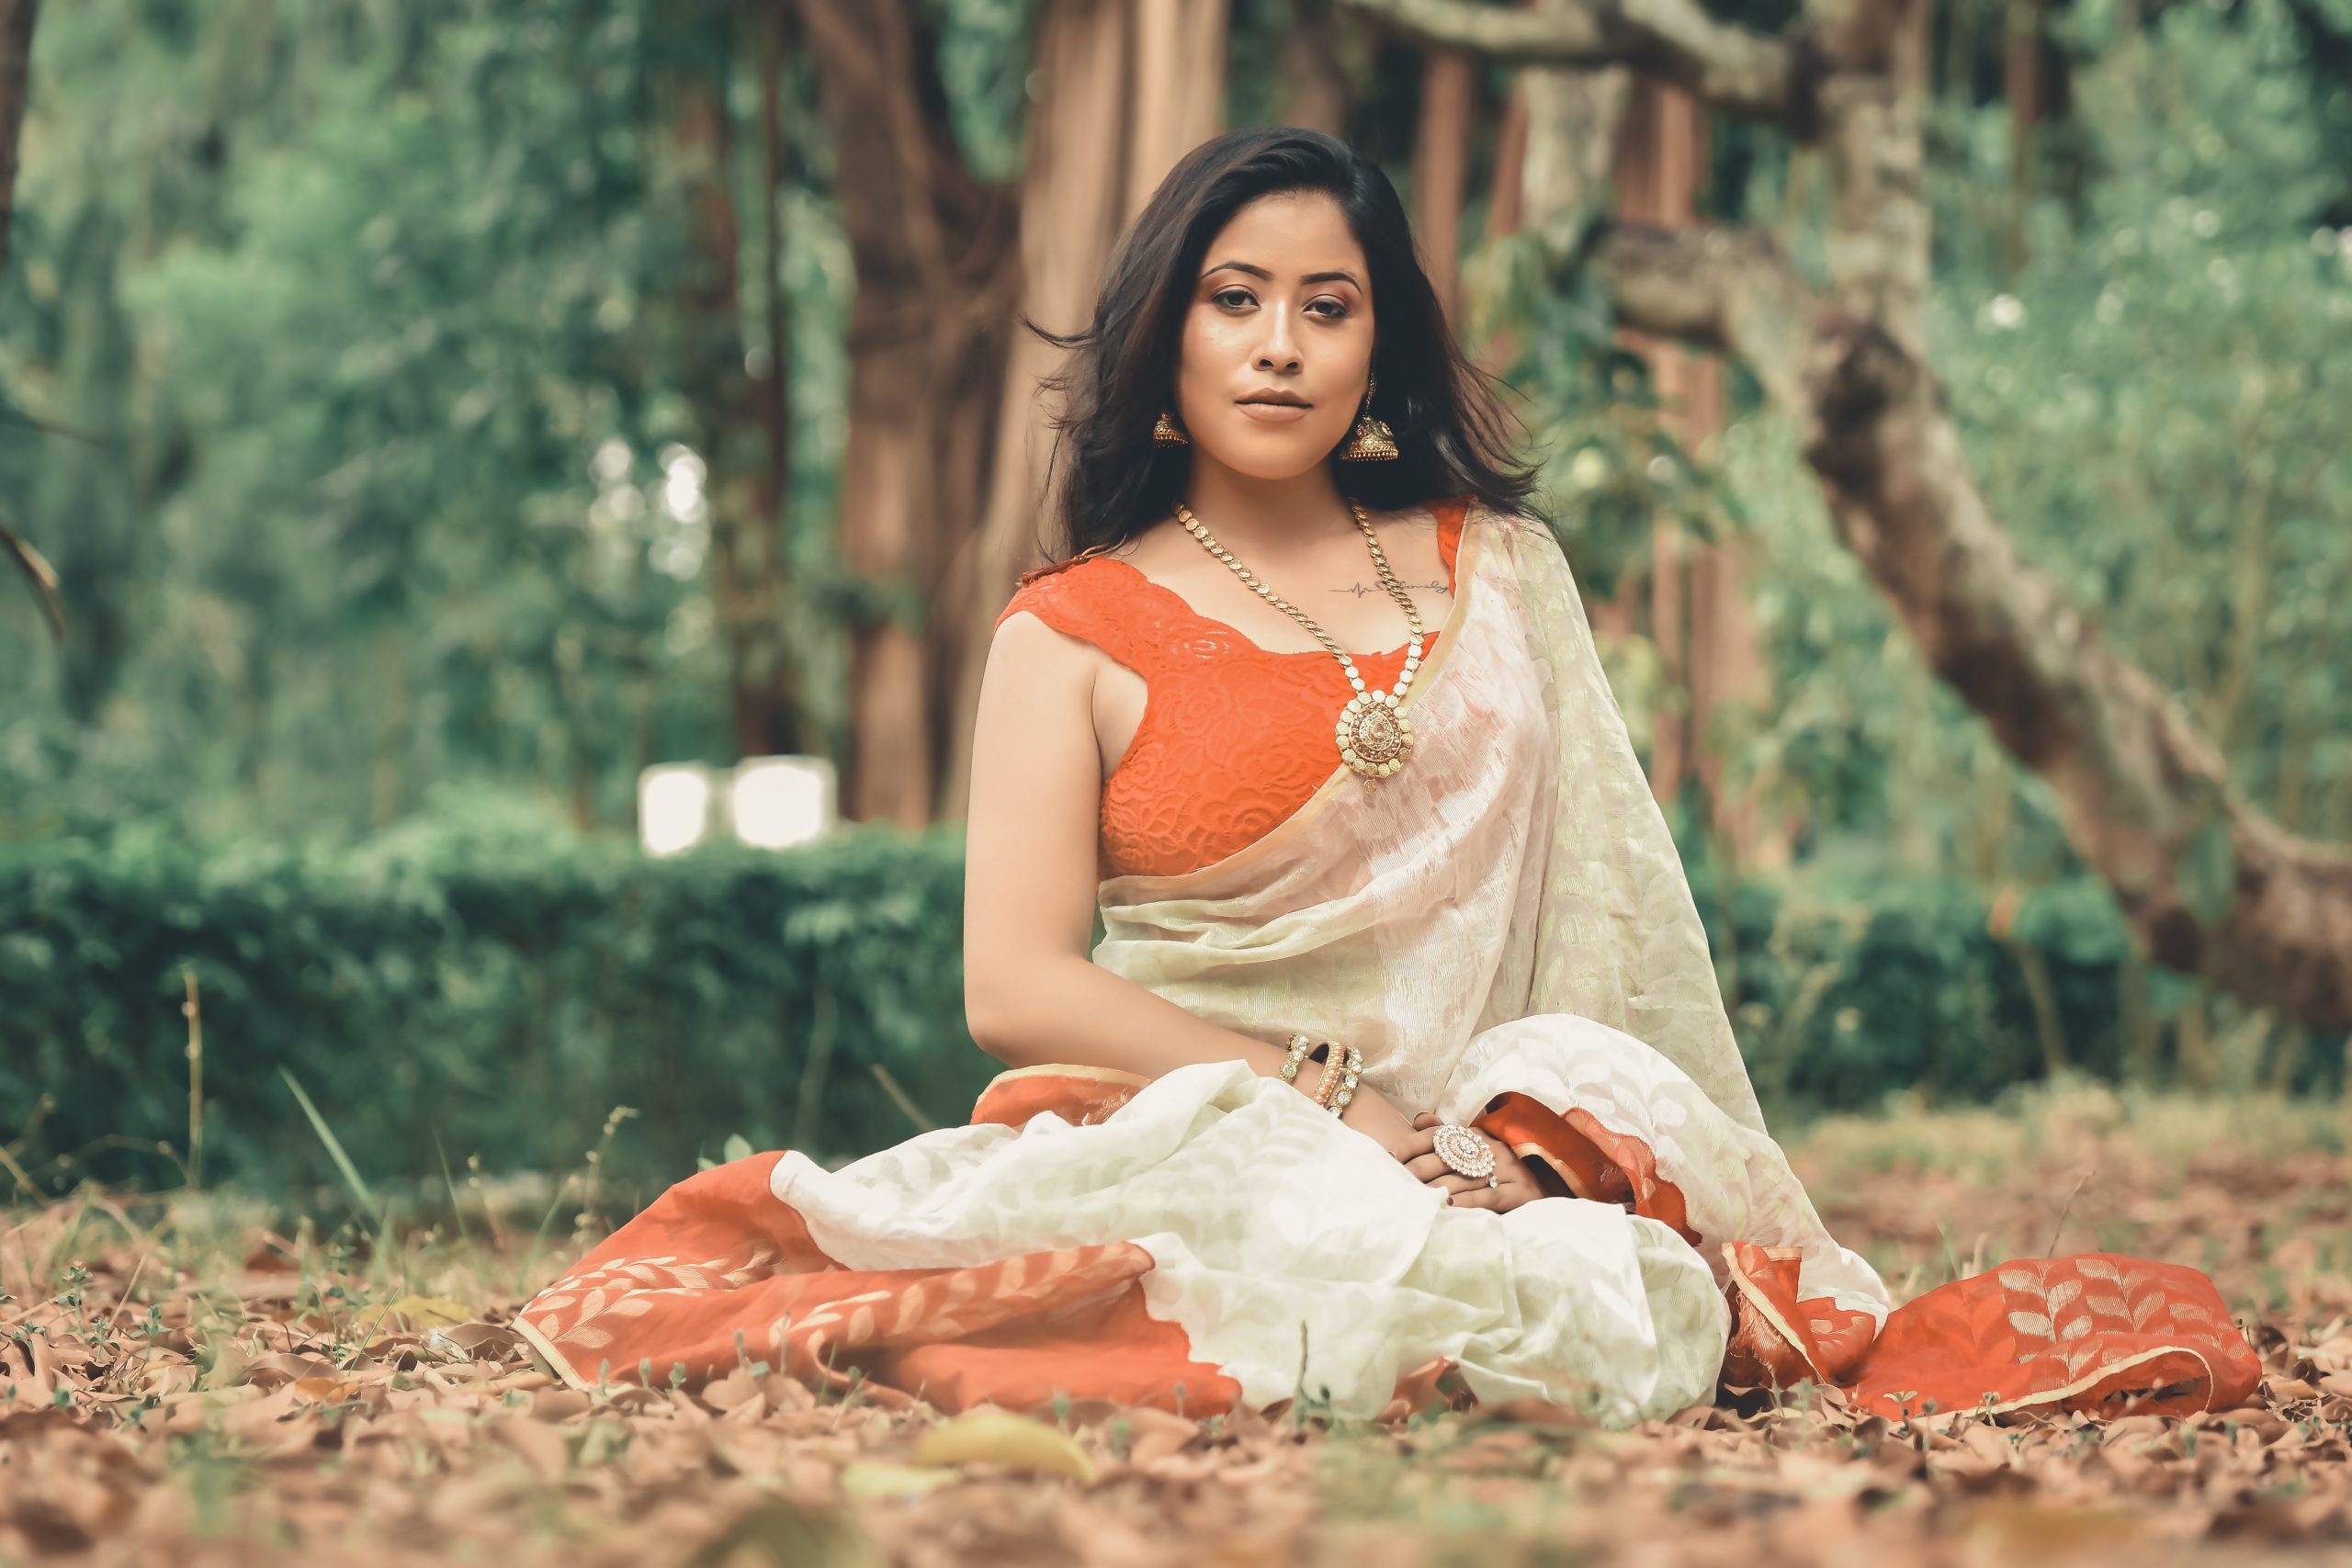 Female model posing in the forest while wearing saree